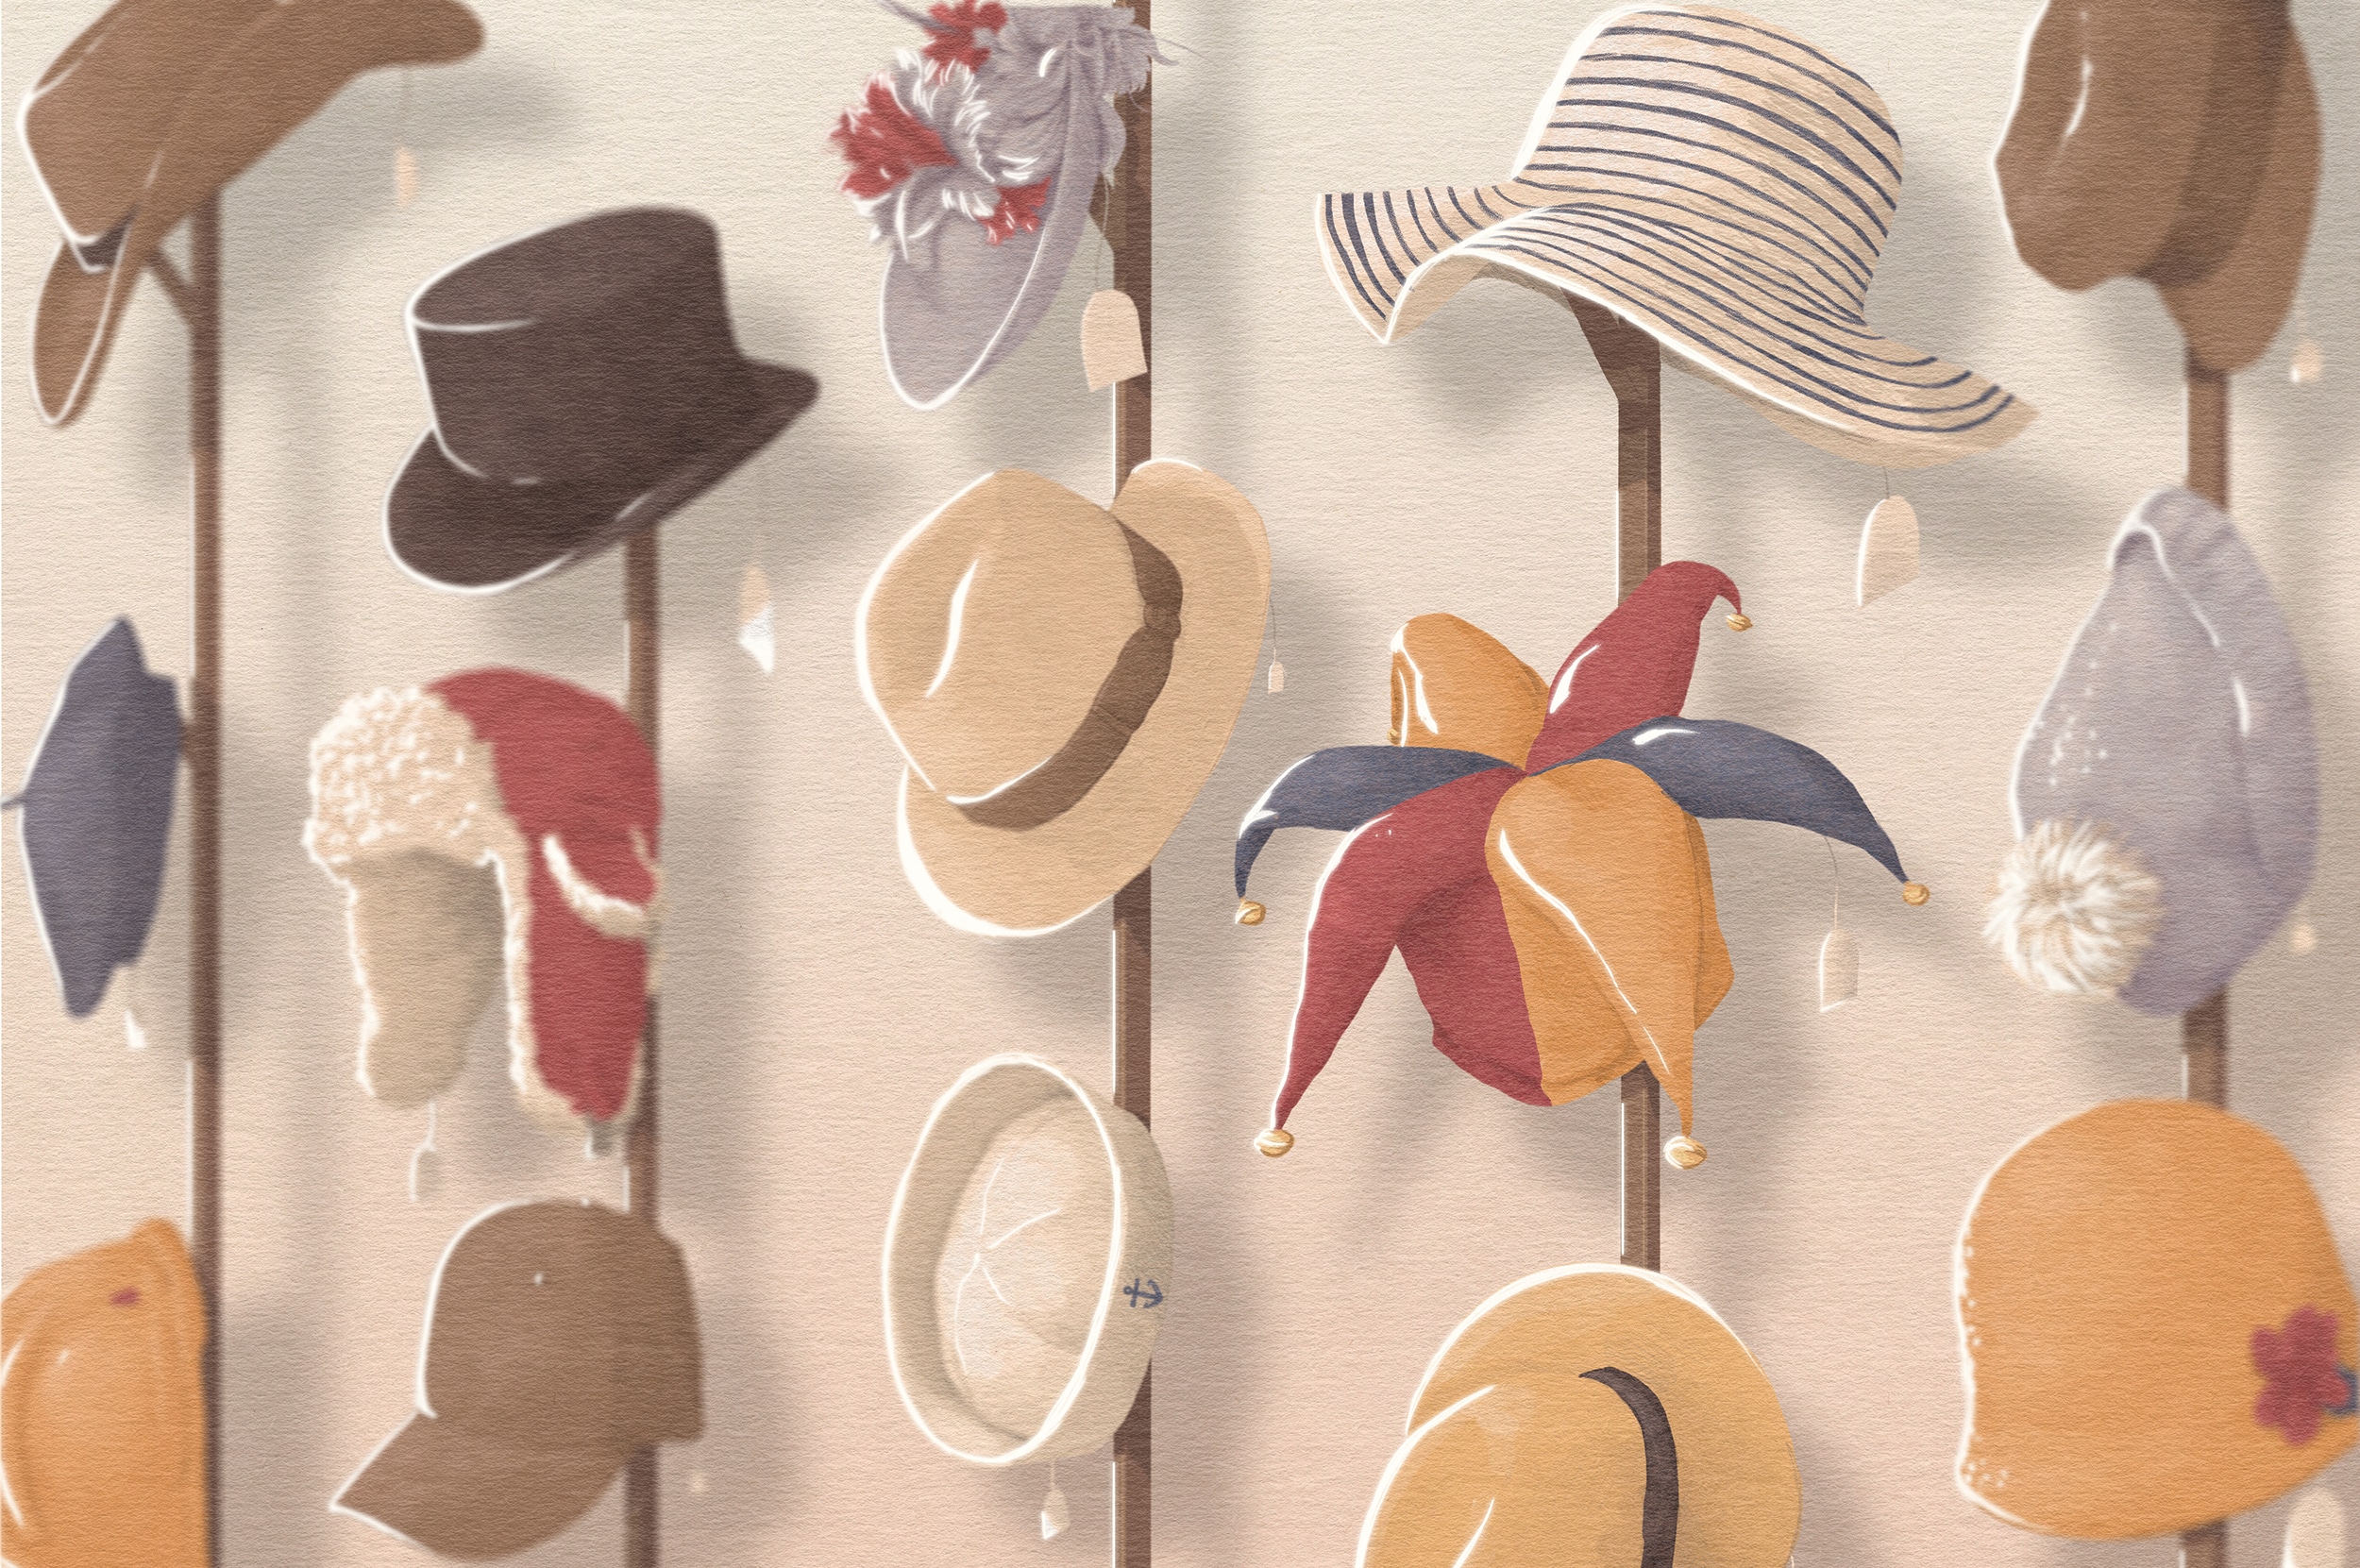 Illustration of various styles of hats, with different sizes of prices tags hanging from them.